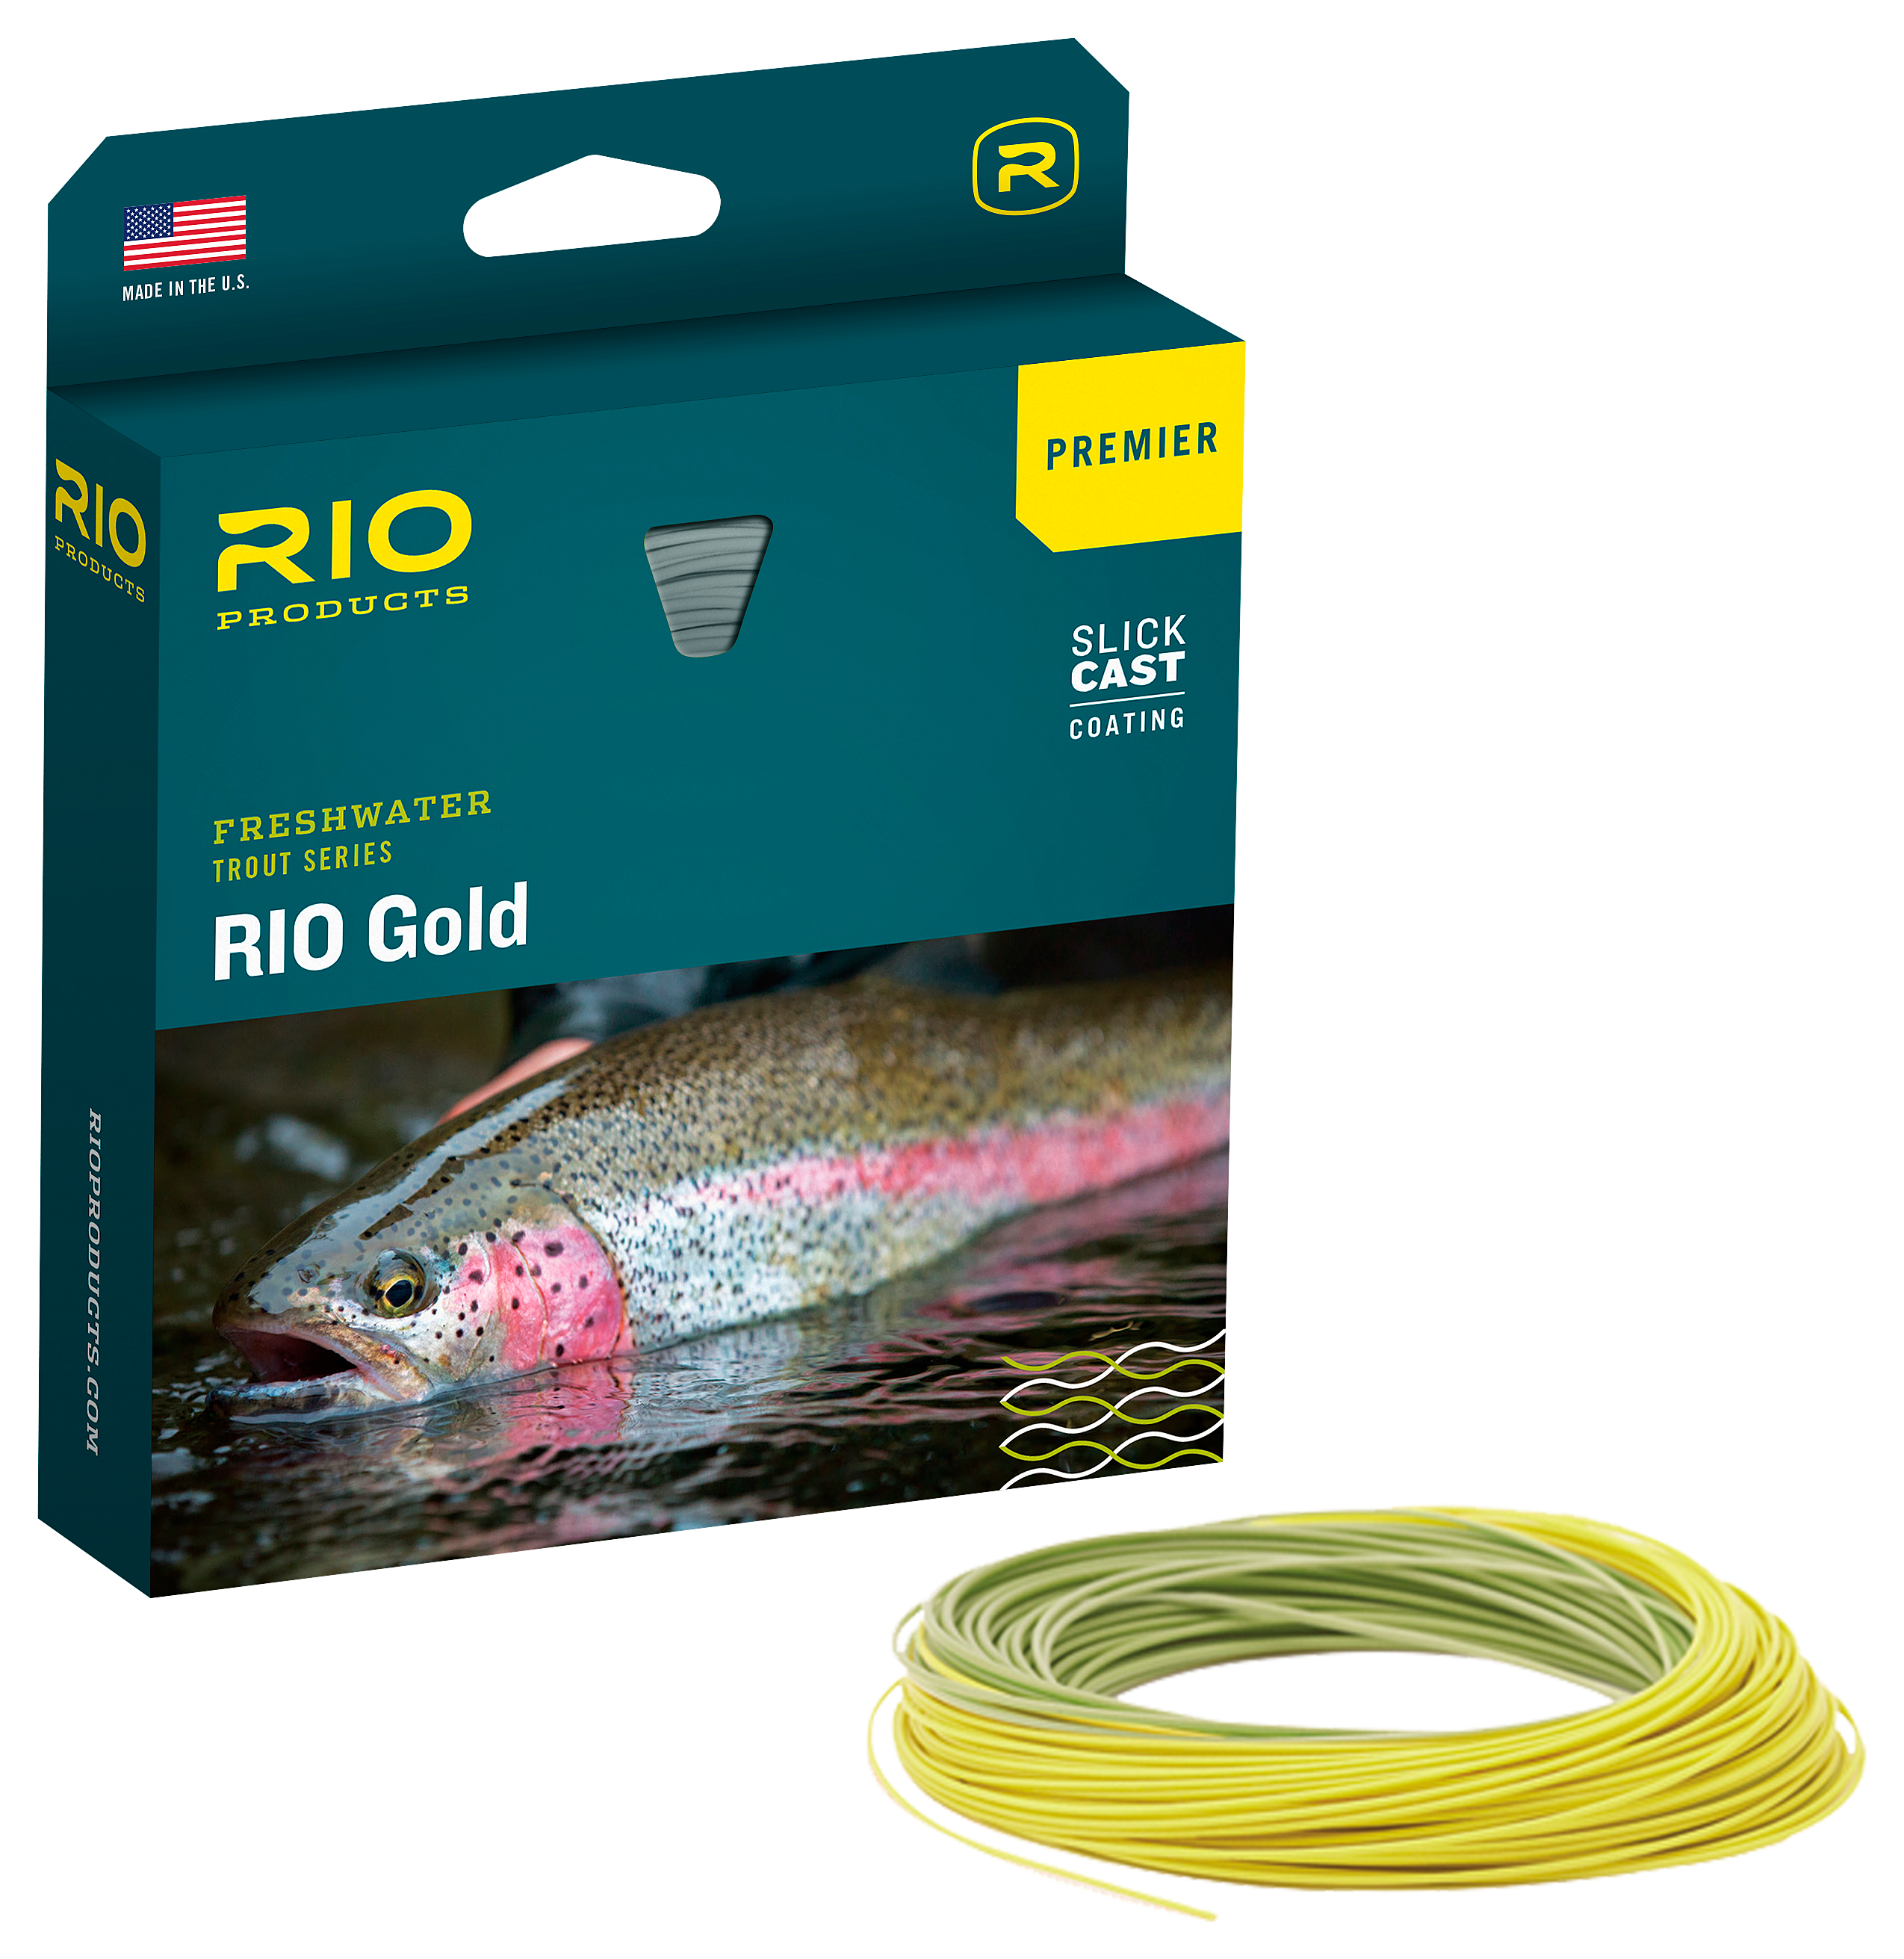 RIO Premier RIO Gold Fly Line - Moss/Gold - 90' - 4 Wt.